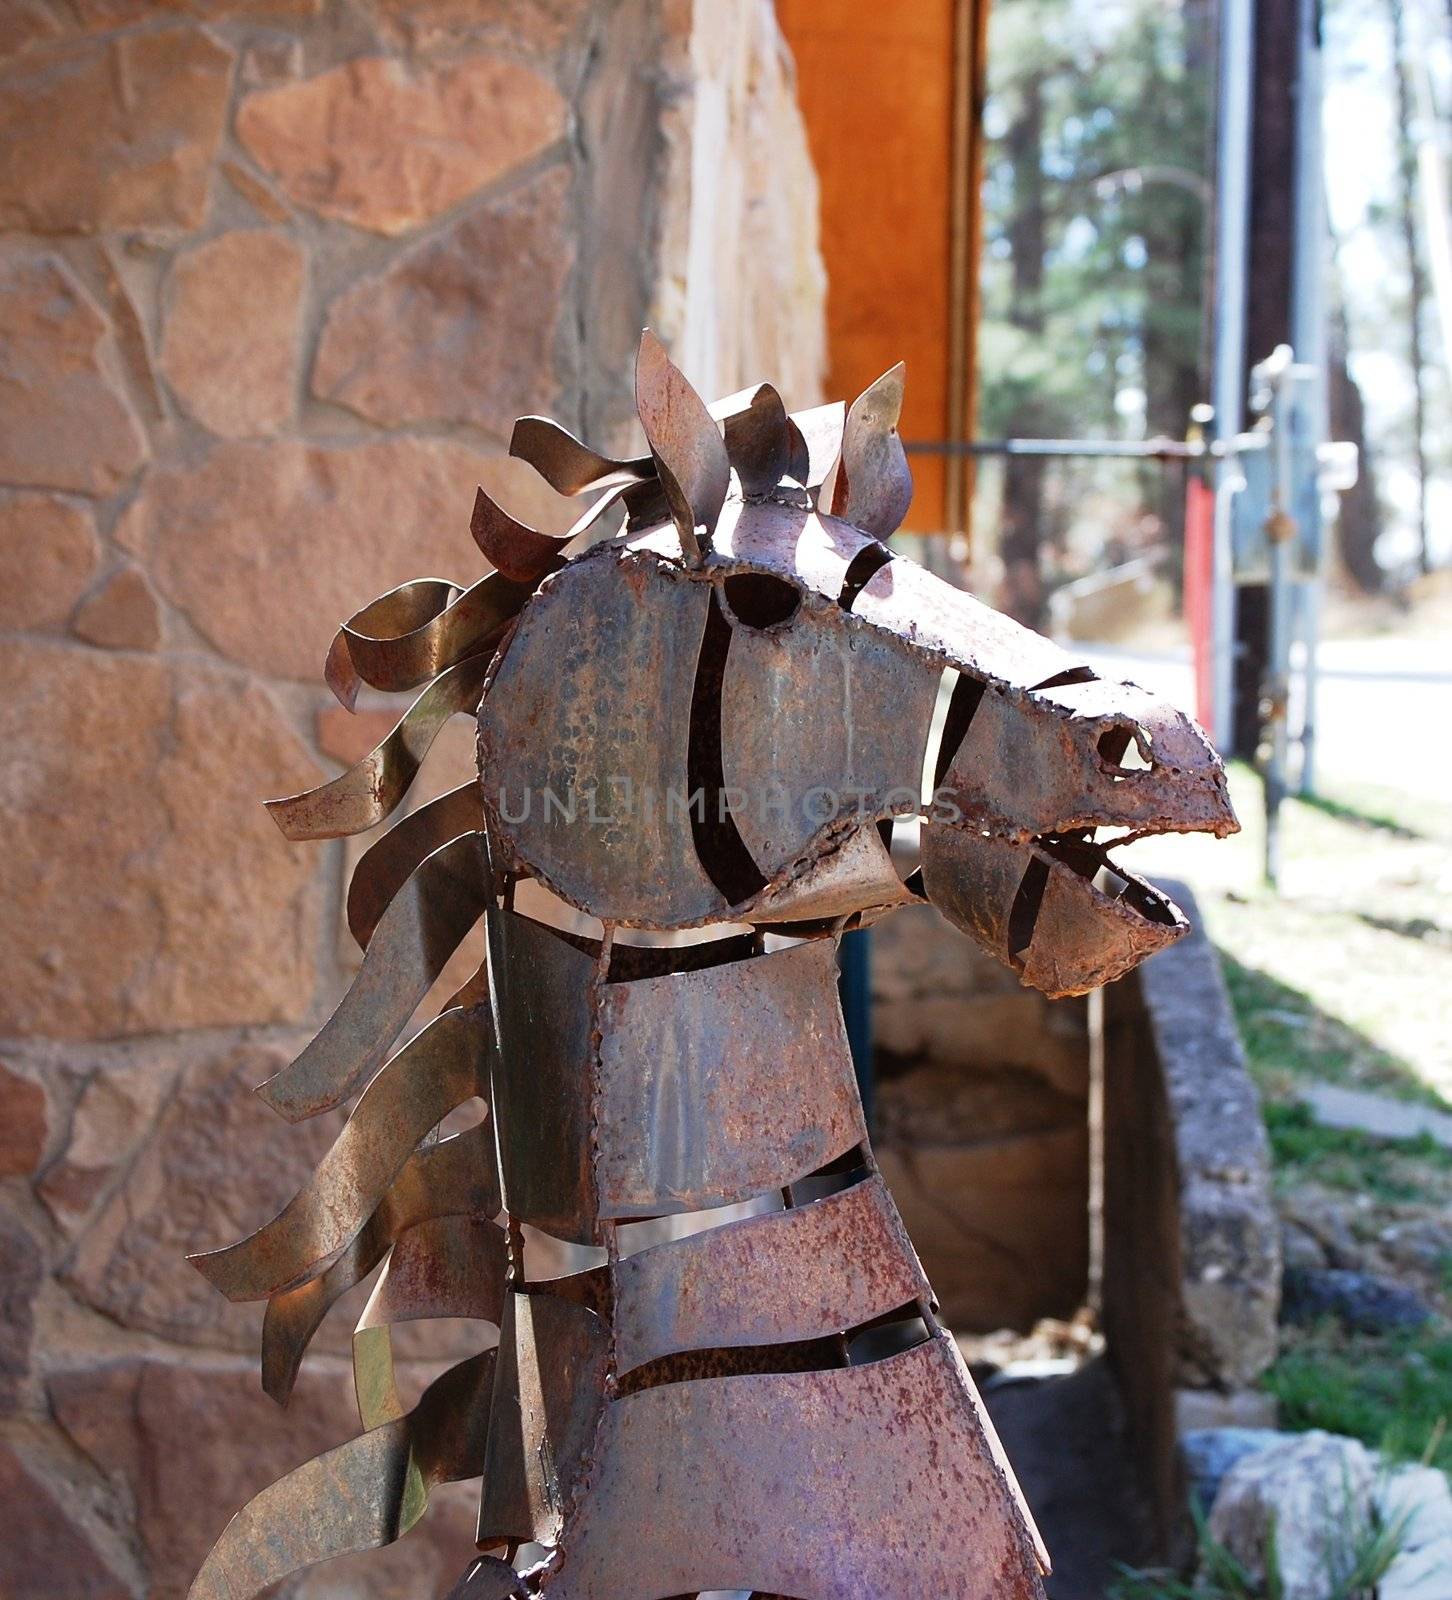 Metal Horse Sculpture - Ruidoso New Mexico by RefocusPhoto